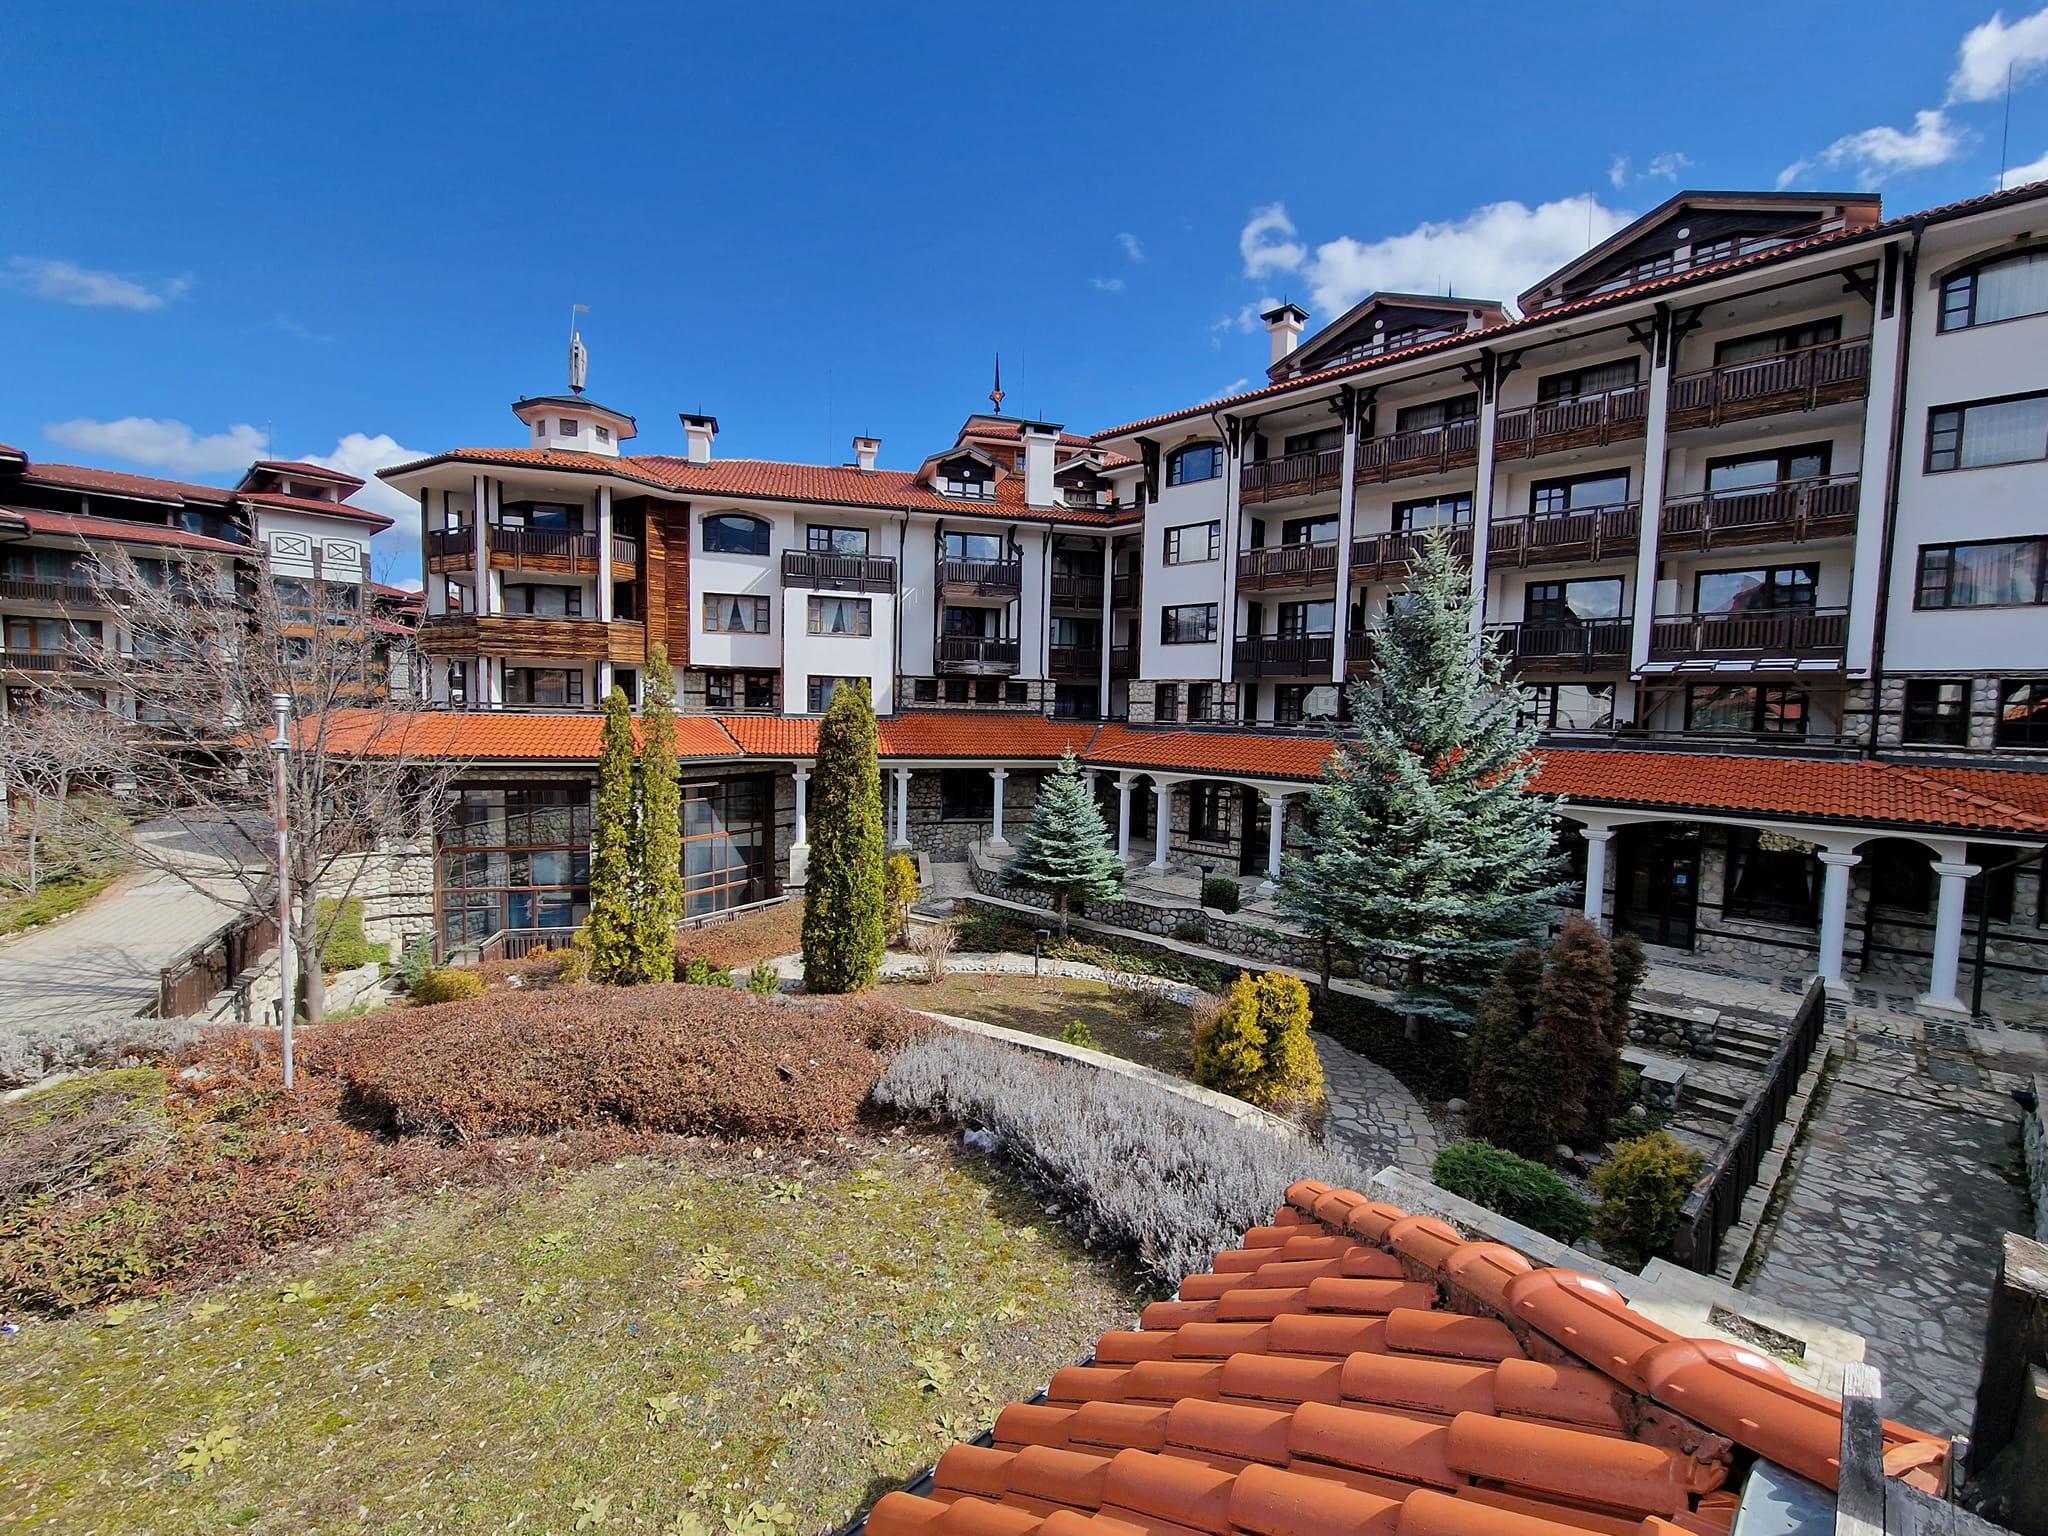 Spacious one bed apartment in Astera Bansko, 200 meters from the Gondola